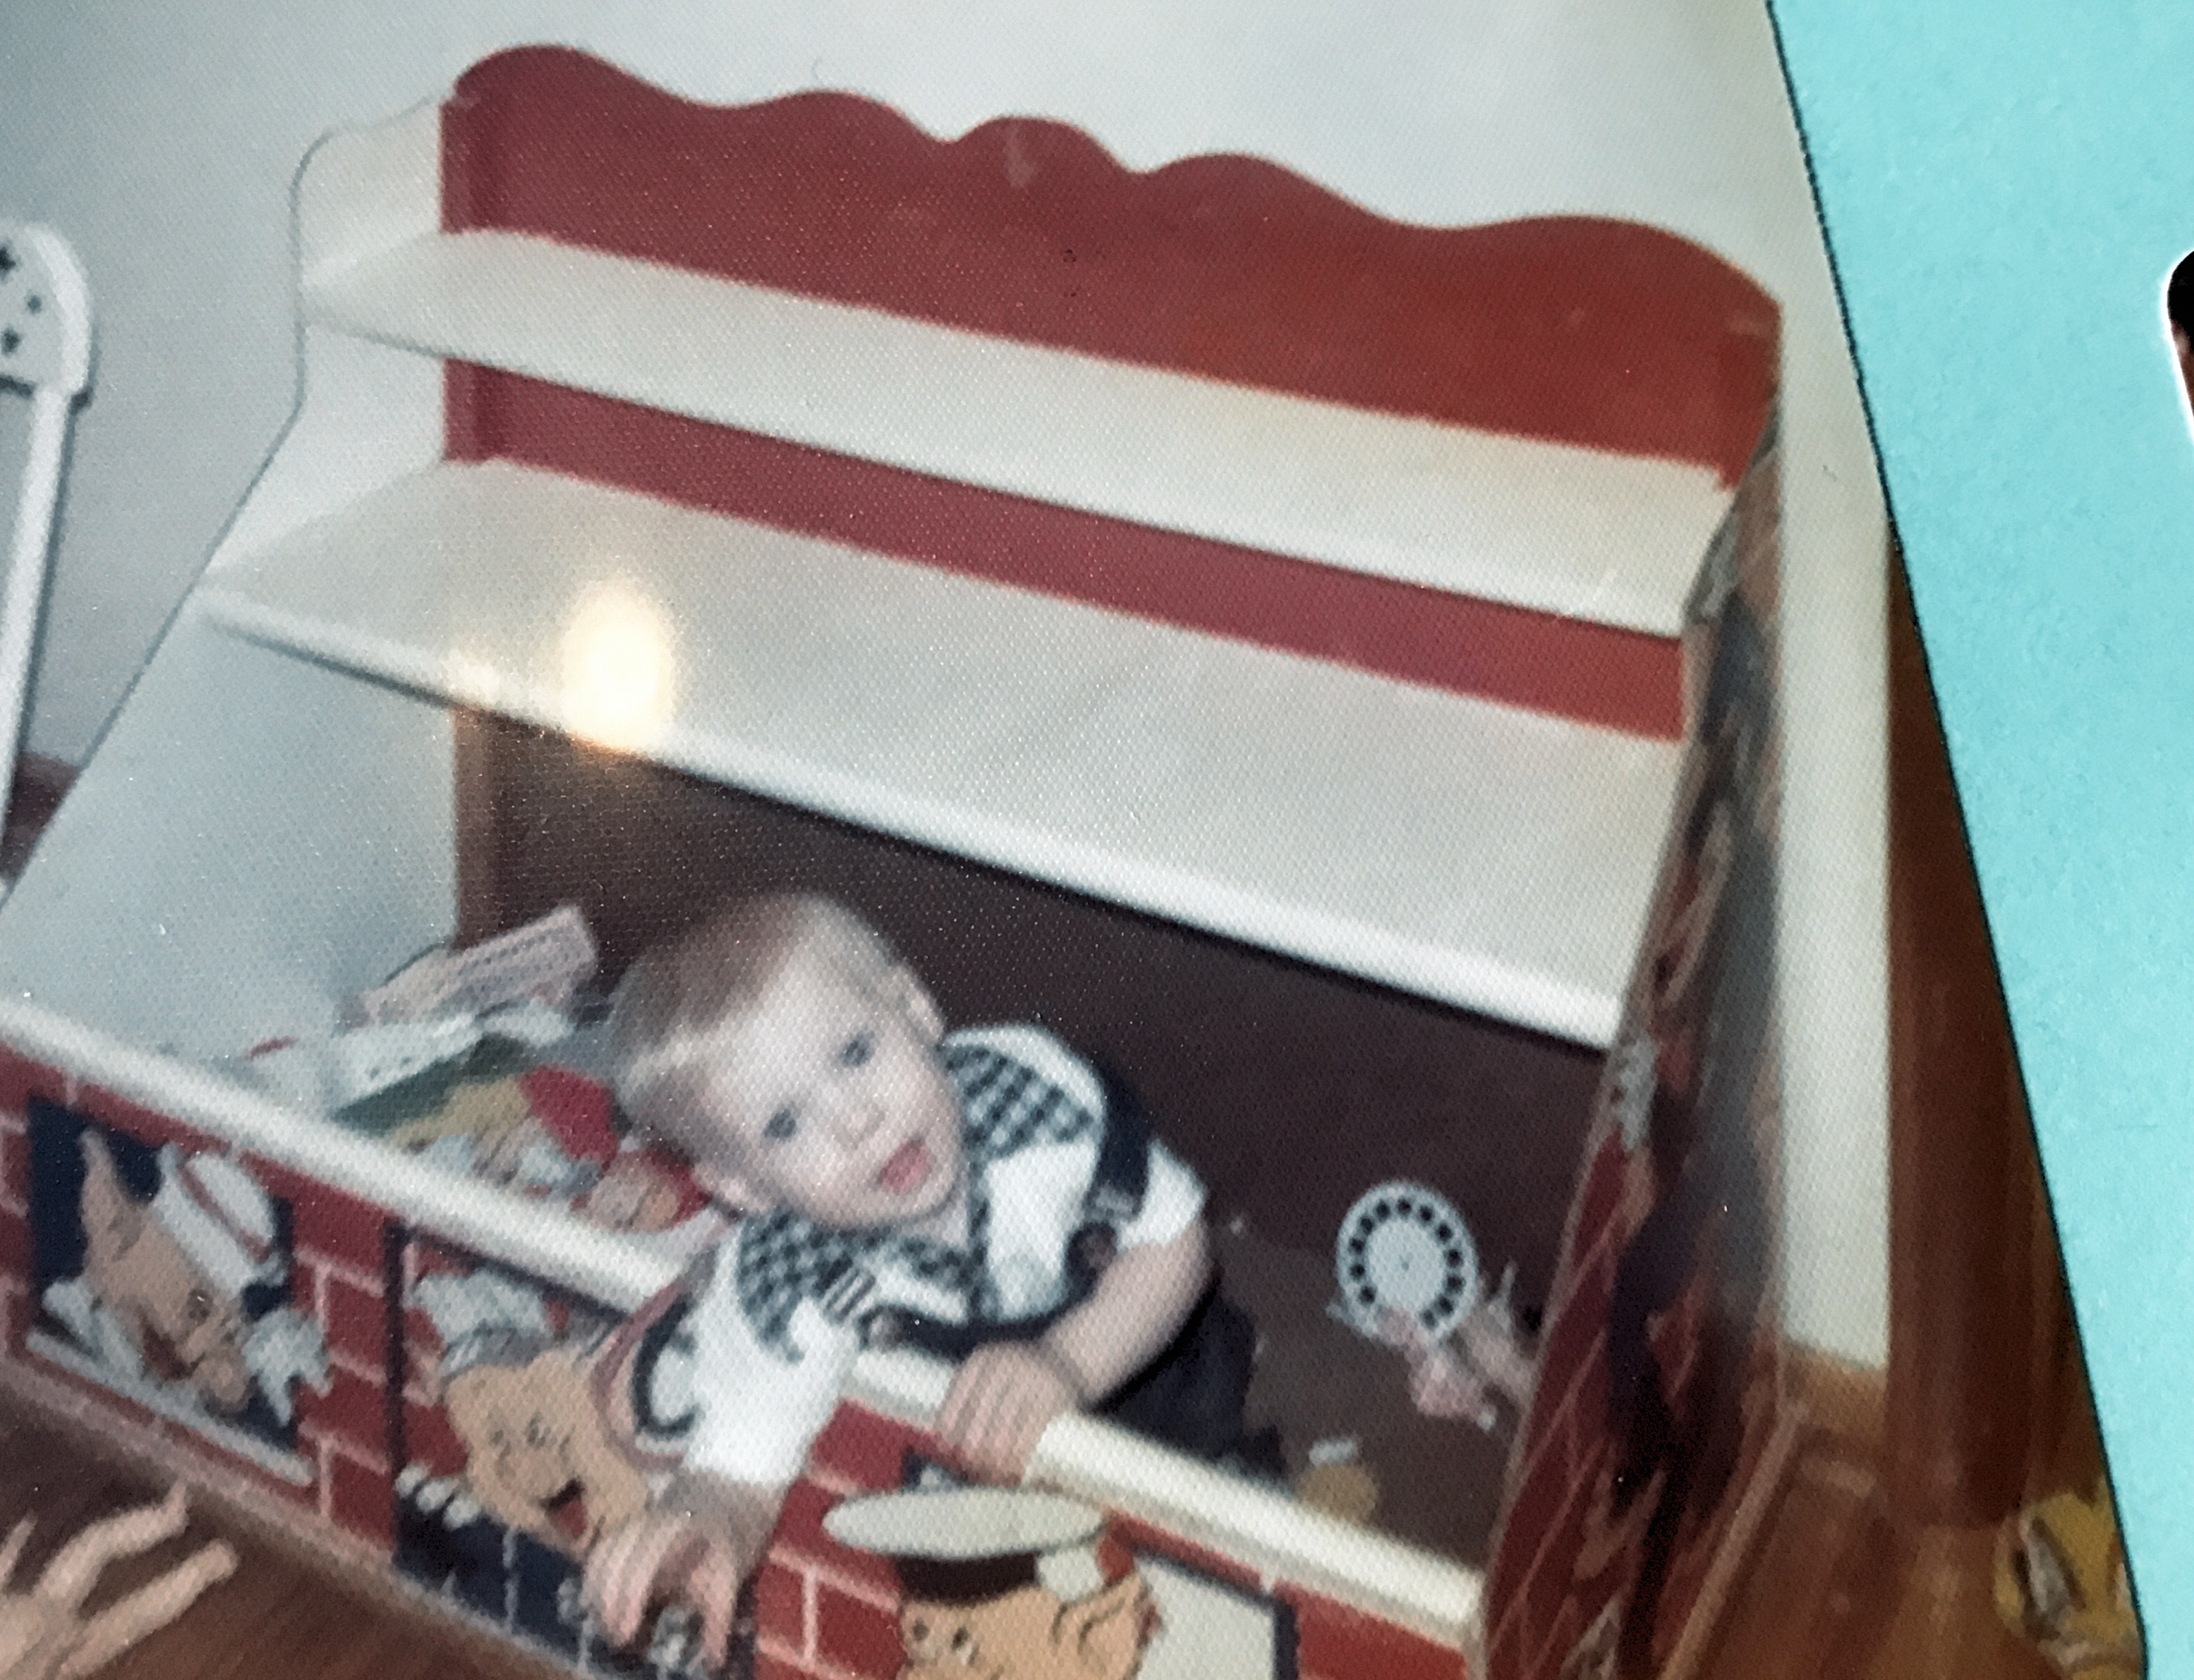 Andy discovers the toy box on Christmas Day 1975, at cousin Chris’ home.